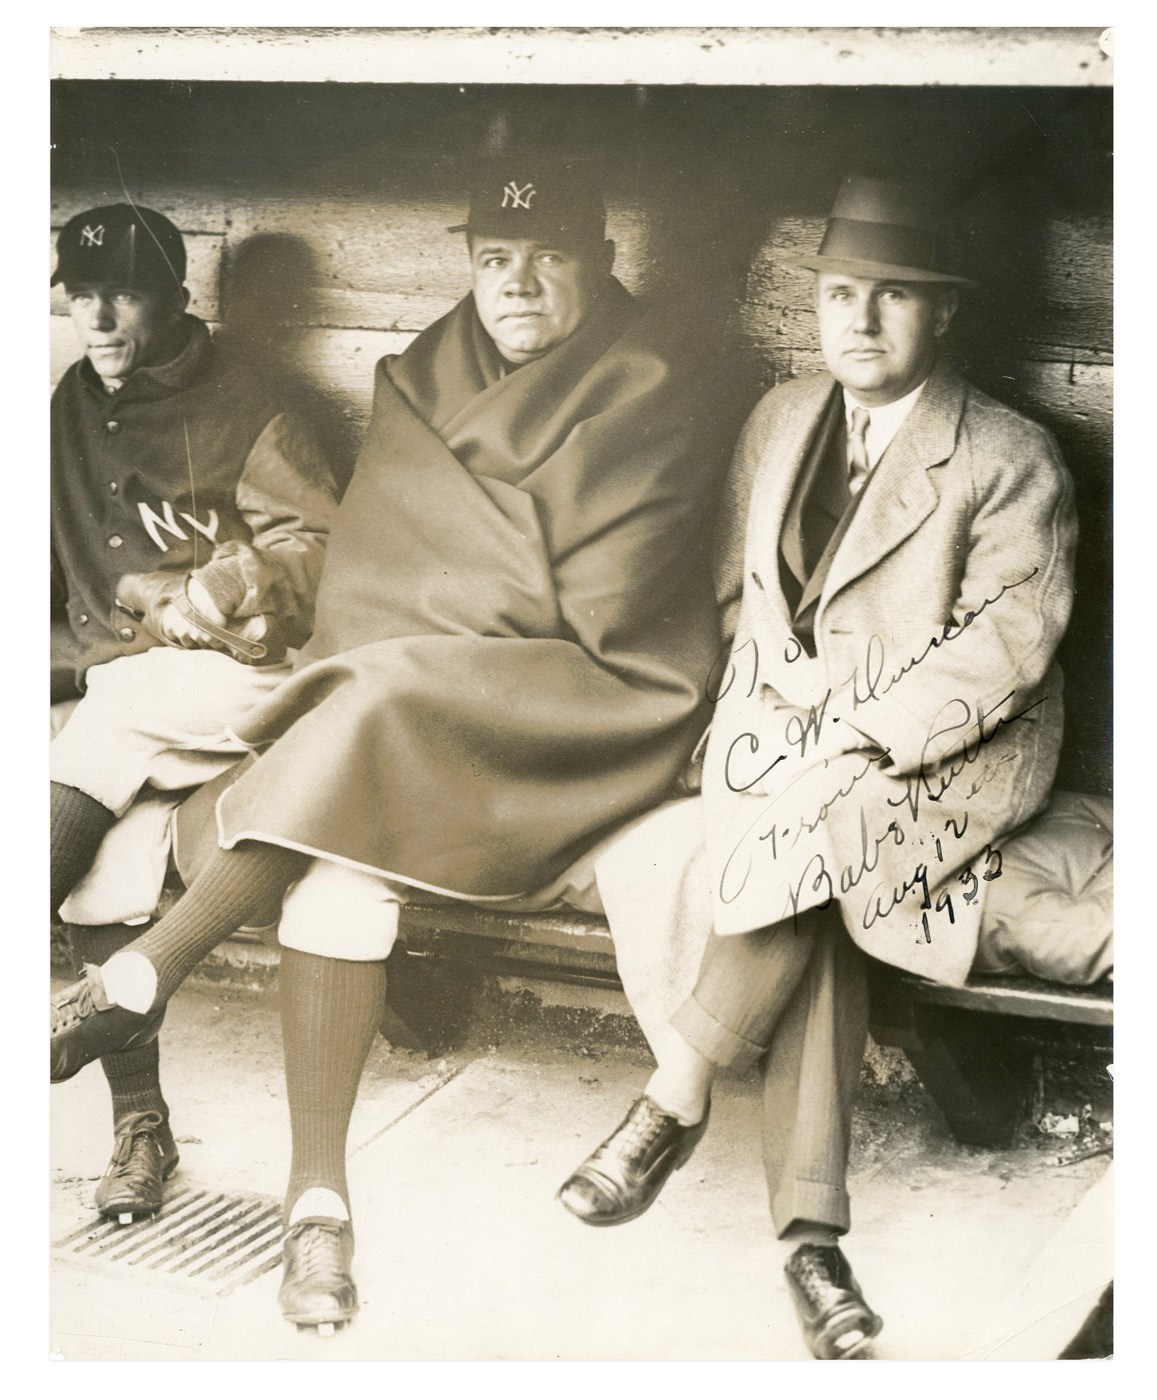 Babe Ruth and Lou Gehrig - 1933 Babe Ruth Signed Photo to Philly Sportswriter (JSA)